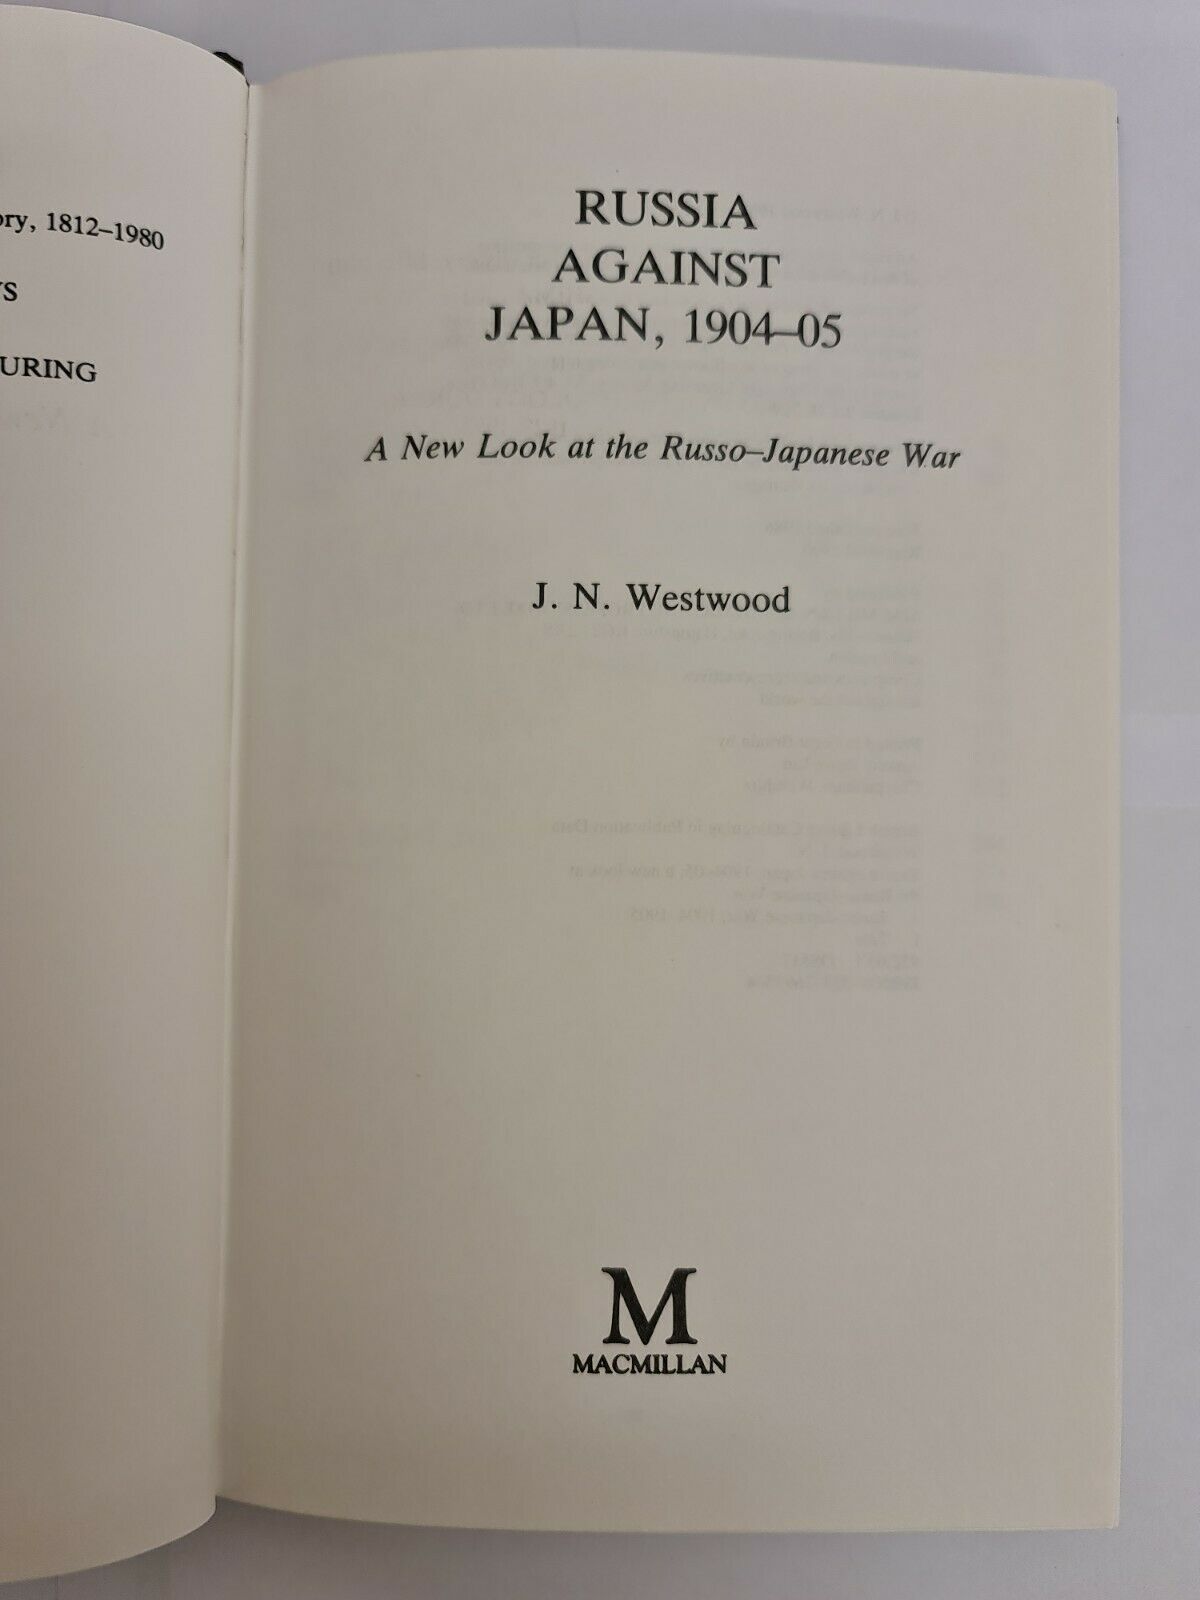 Russia Against Japan, 1904-05: New Look at the Russo-Japanese War